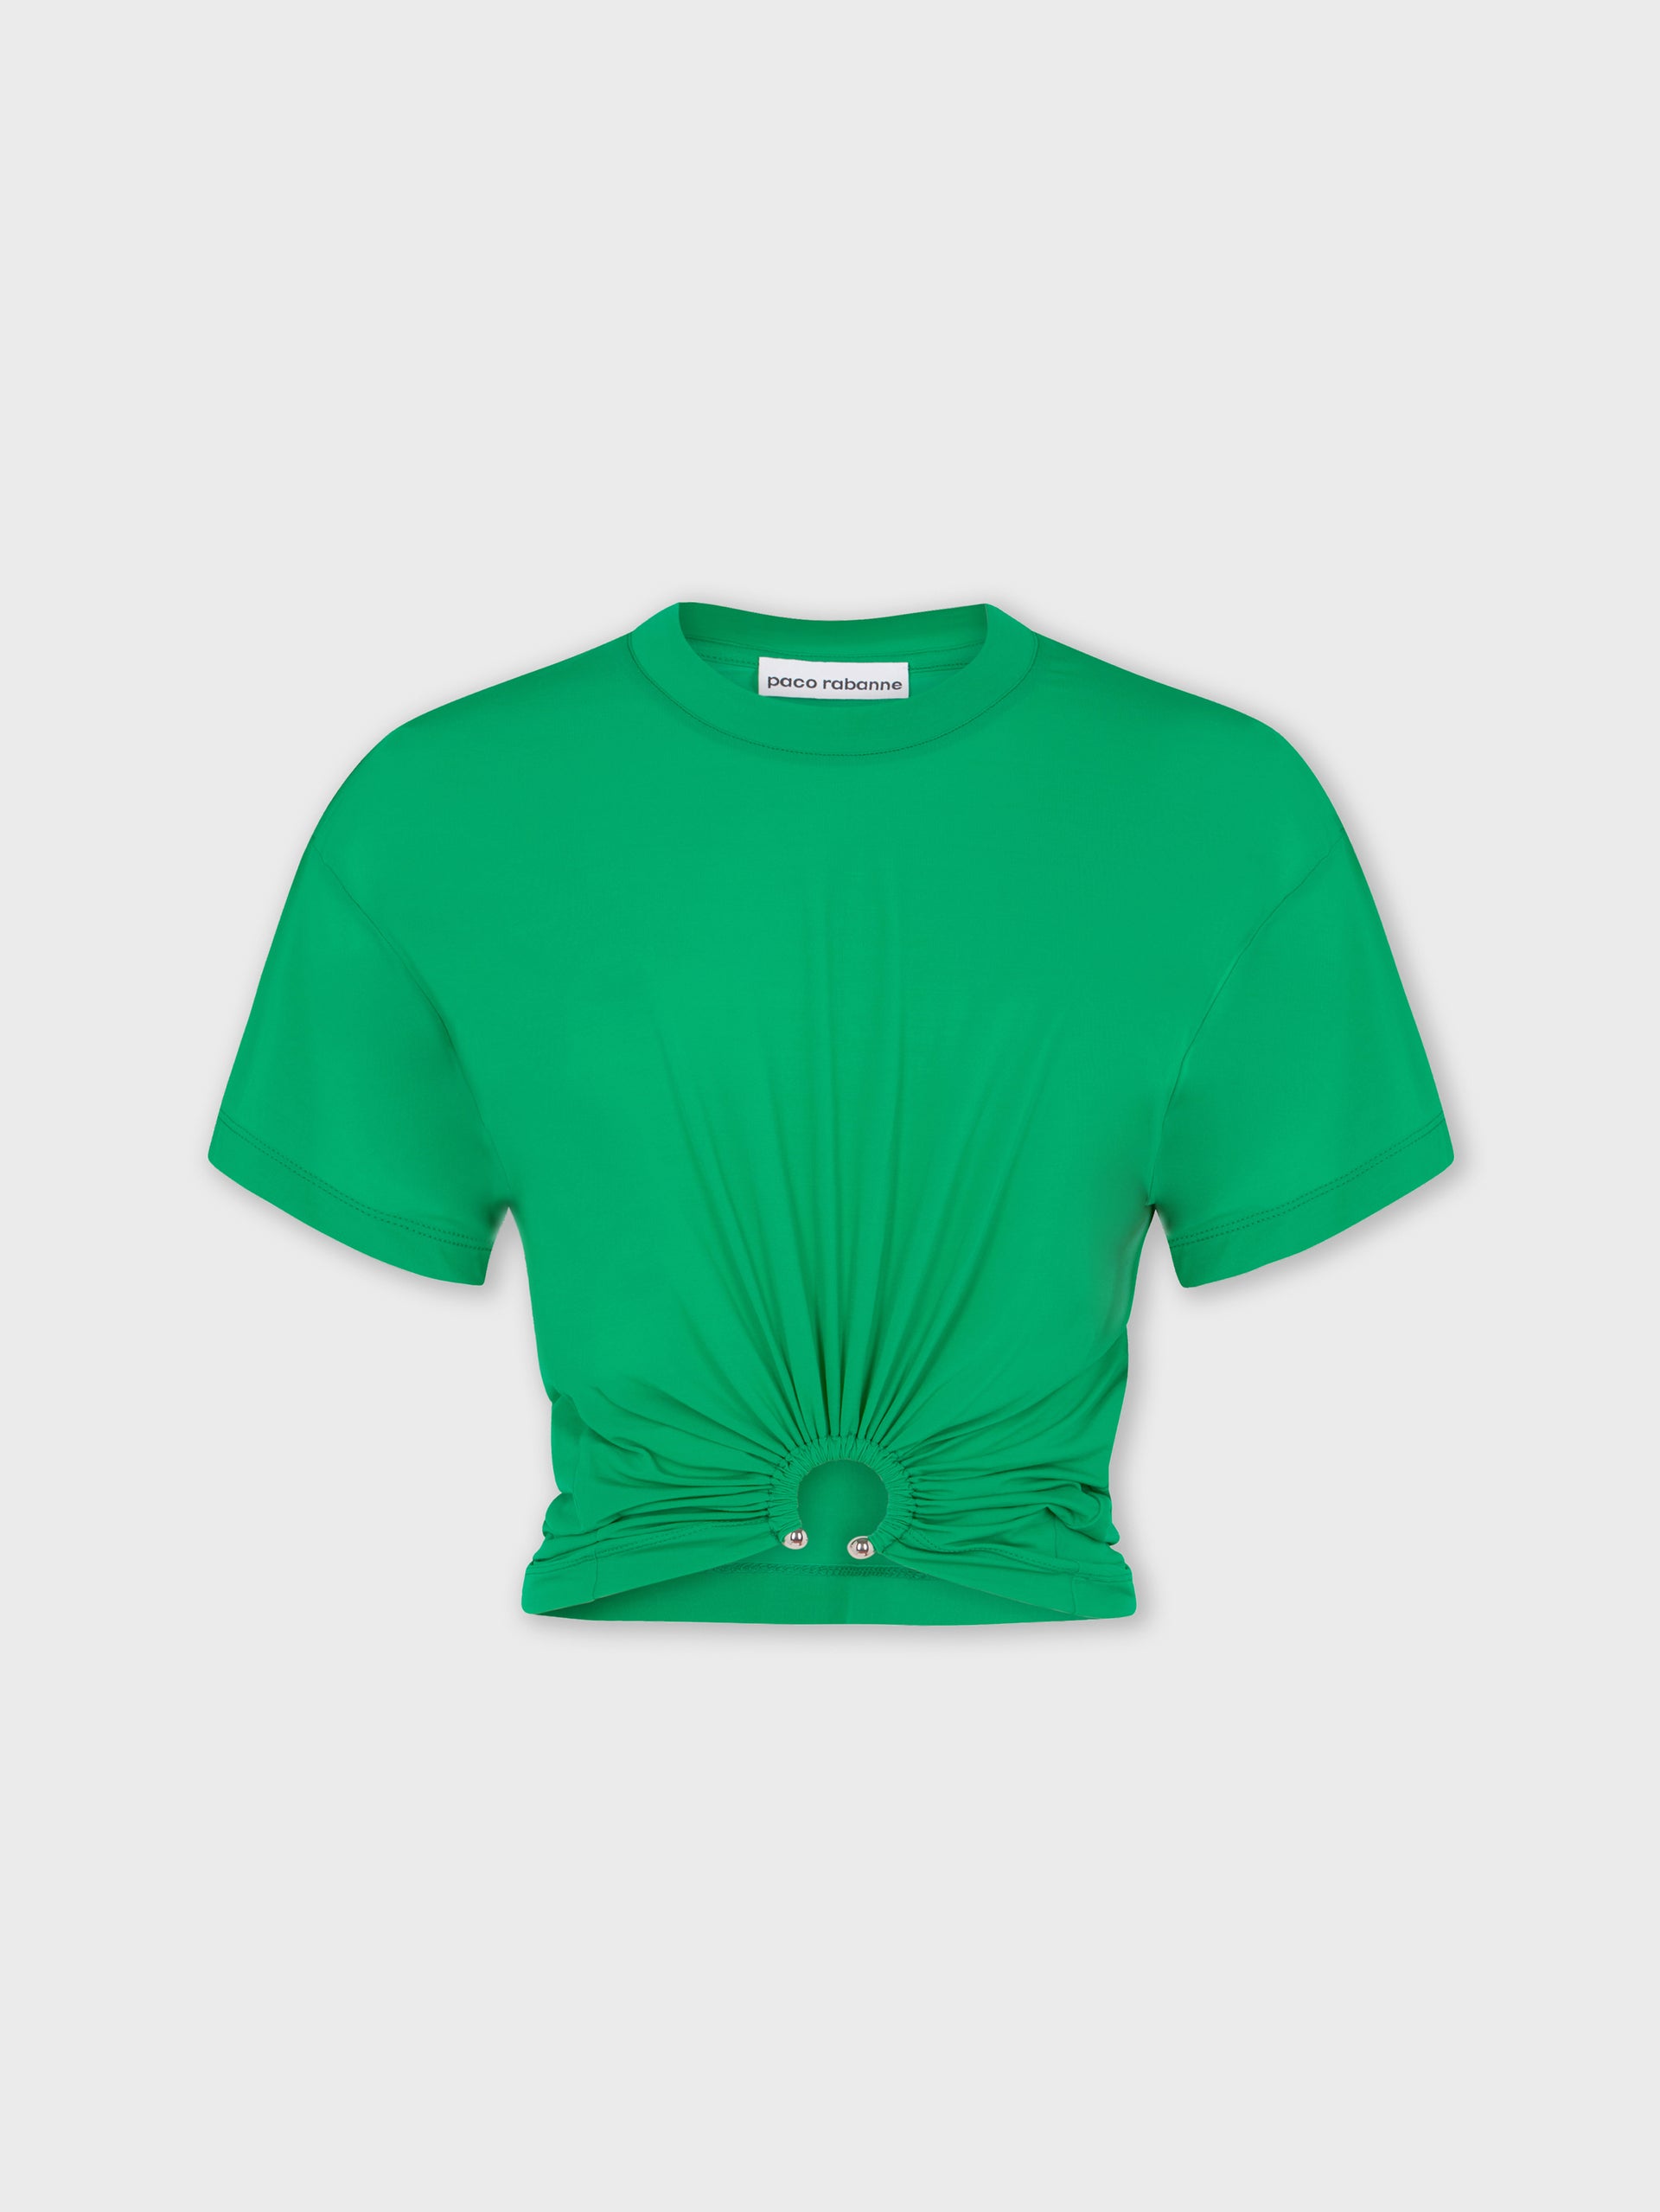 EMERALD T-shirt IN JERSEY WITH PIERCING RING